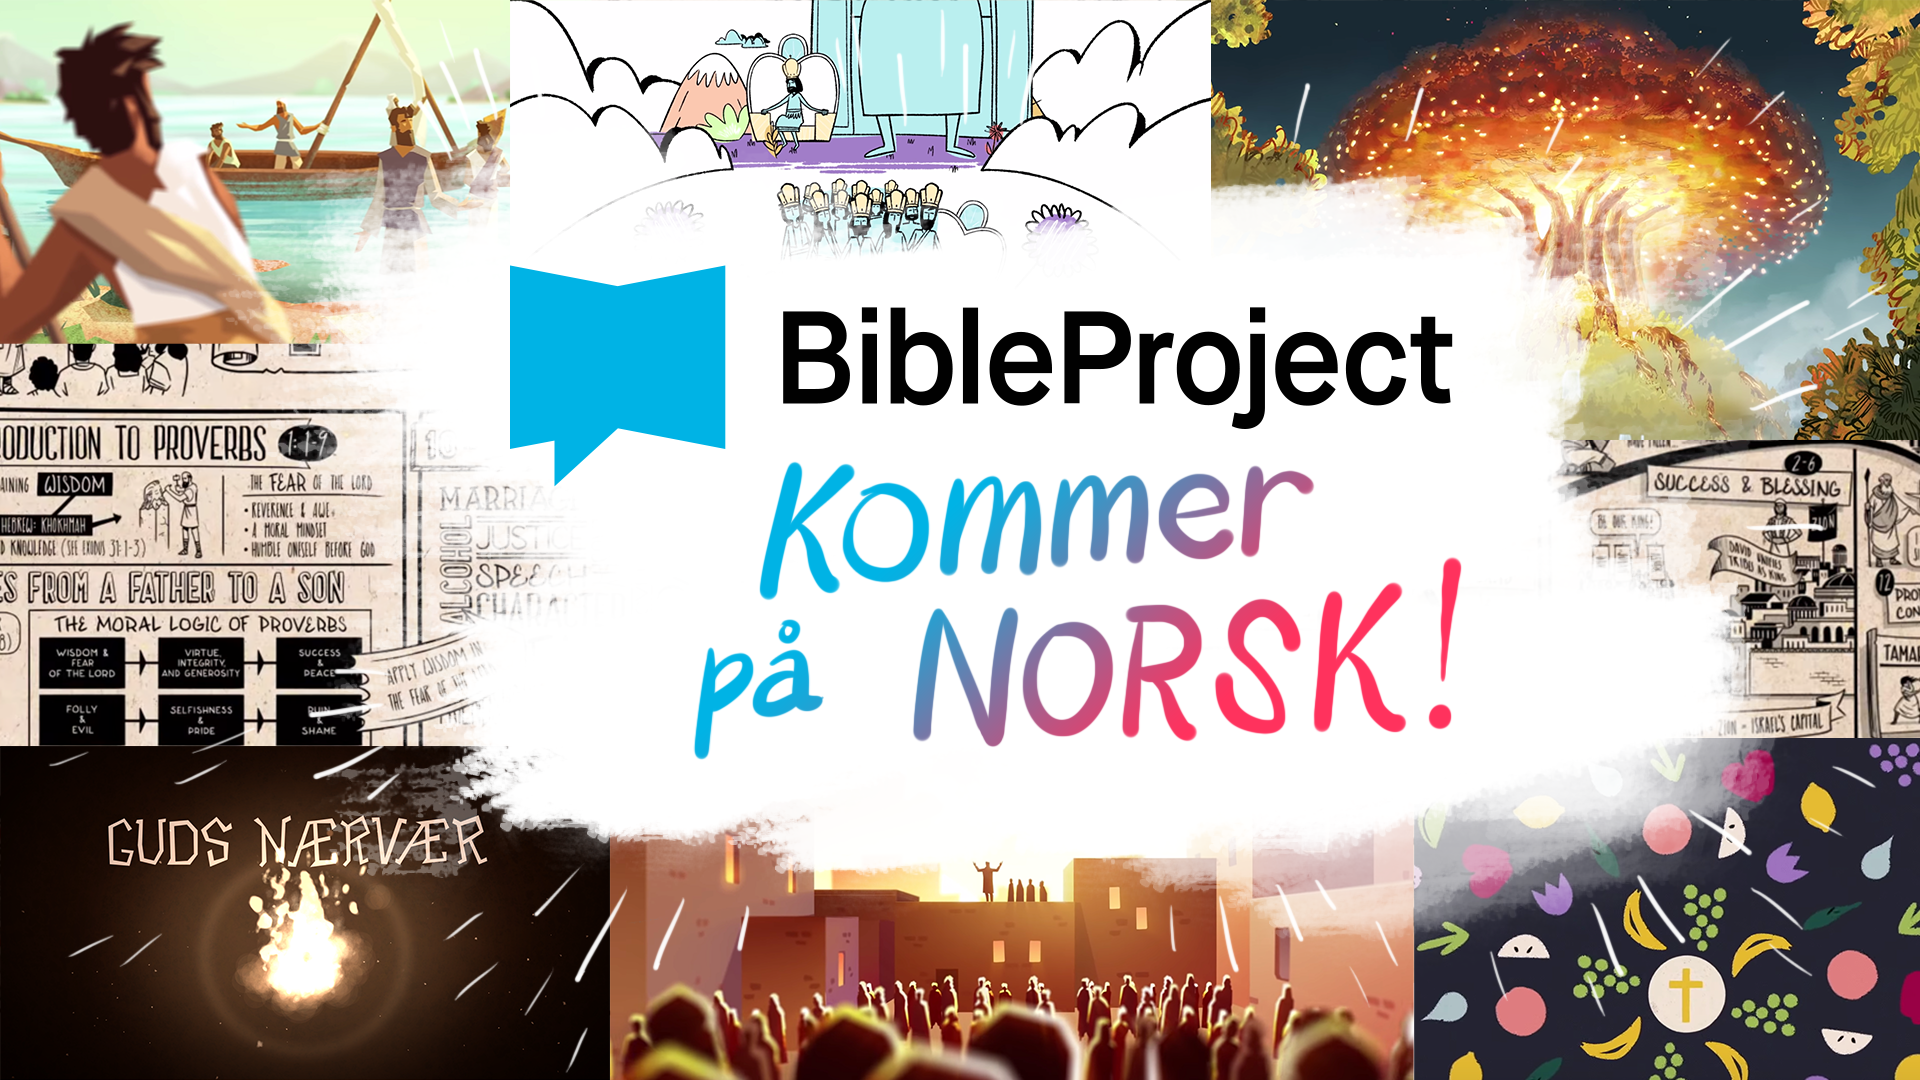 2020 Bible Project kommer pa norsk